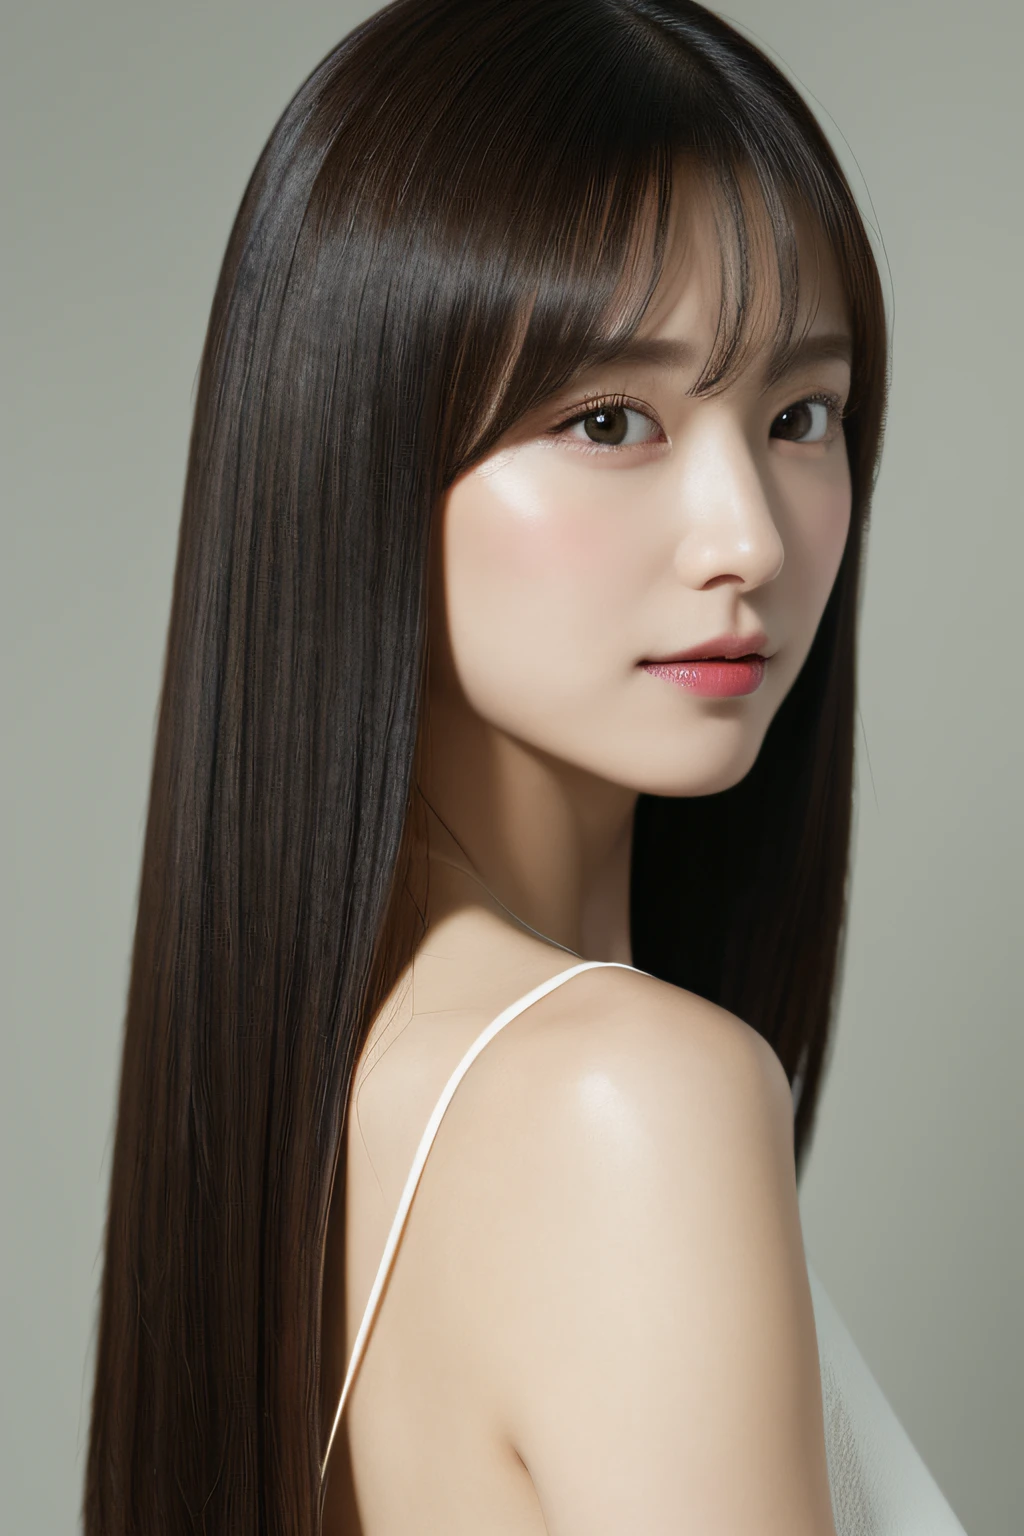 8k wallpaper、top-quality、​masterpiece、realisitic、Photorealsitic、middlebreast、profetional lighting、Angle from behind、Shot in natural light、super detailing、age 30s、Hairstyle is straight straight hair、Delicate skin type、Emphasizes the luster of hair、Look at viewers